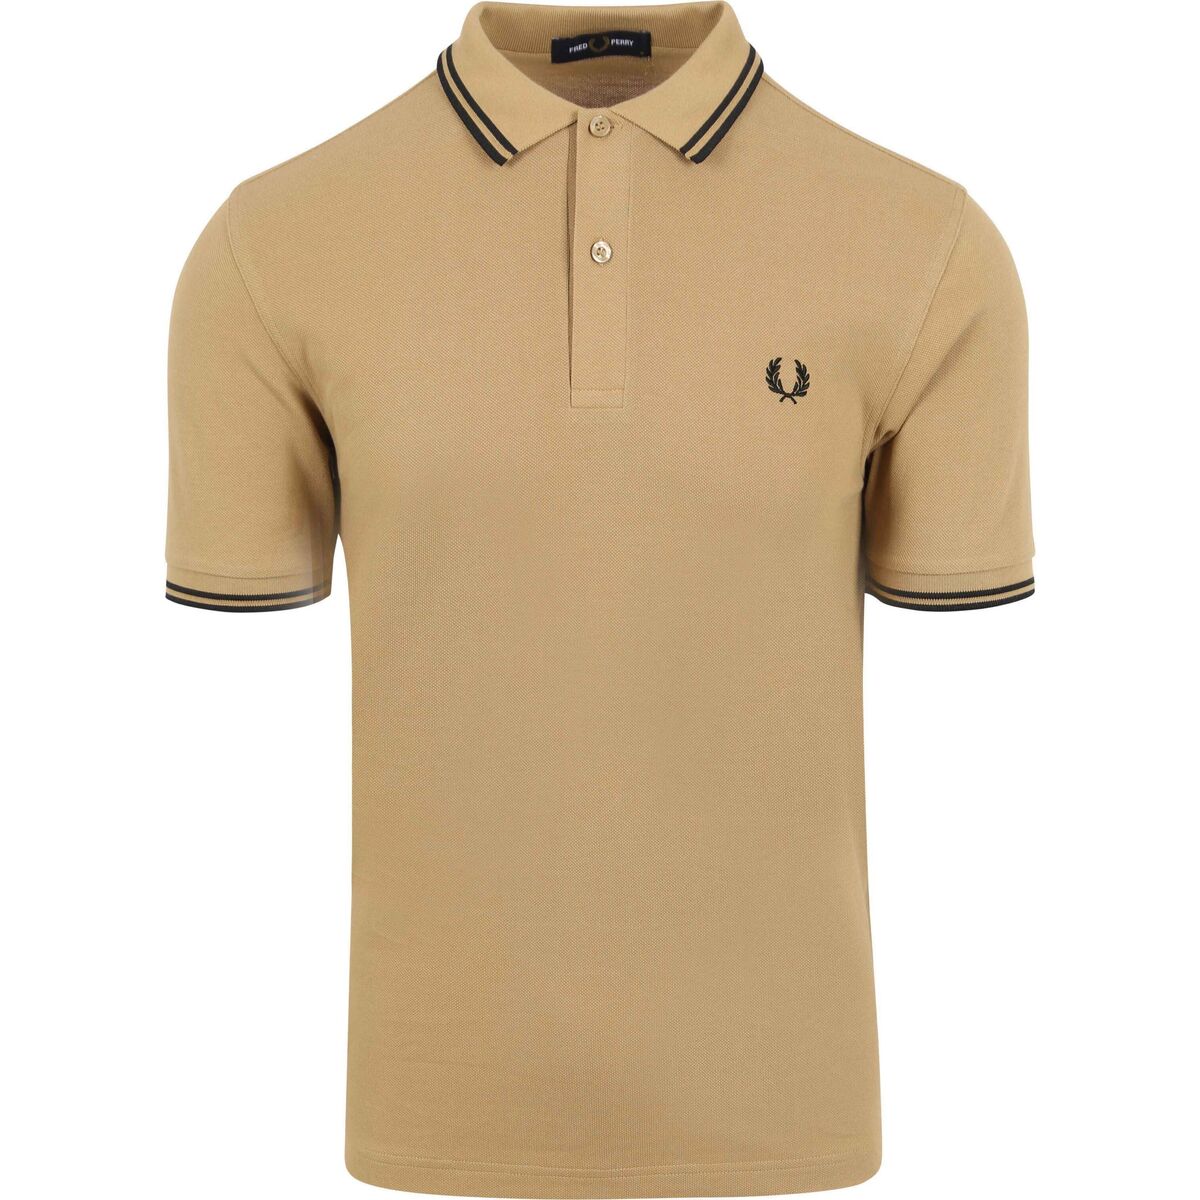 Vêtements Homme Great little polo gris top lovely warm wish I came in different colours Fred Perry Polo gris M3600 Beige U88 Beige